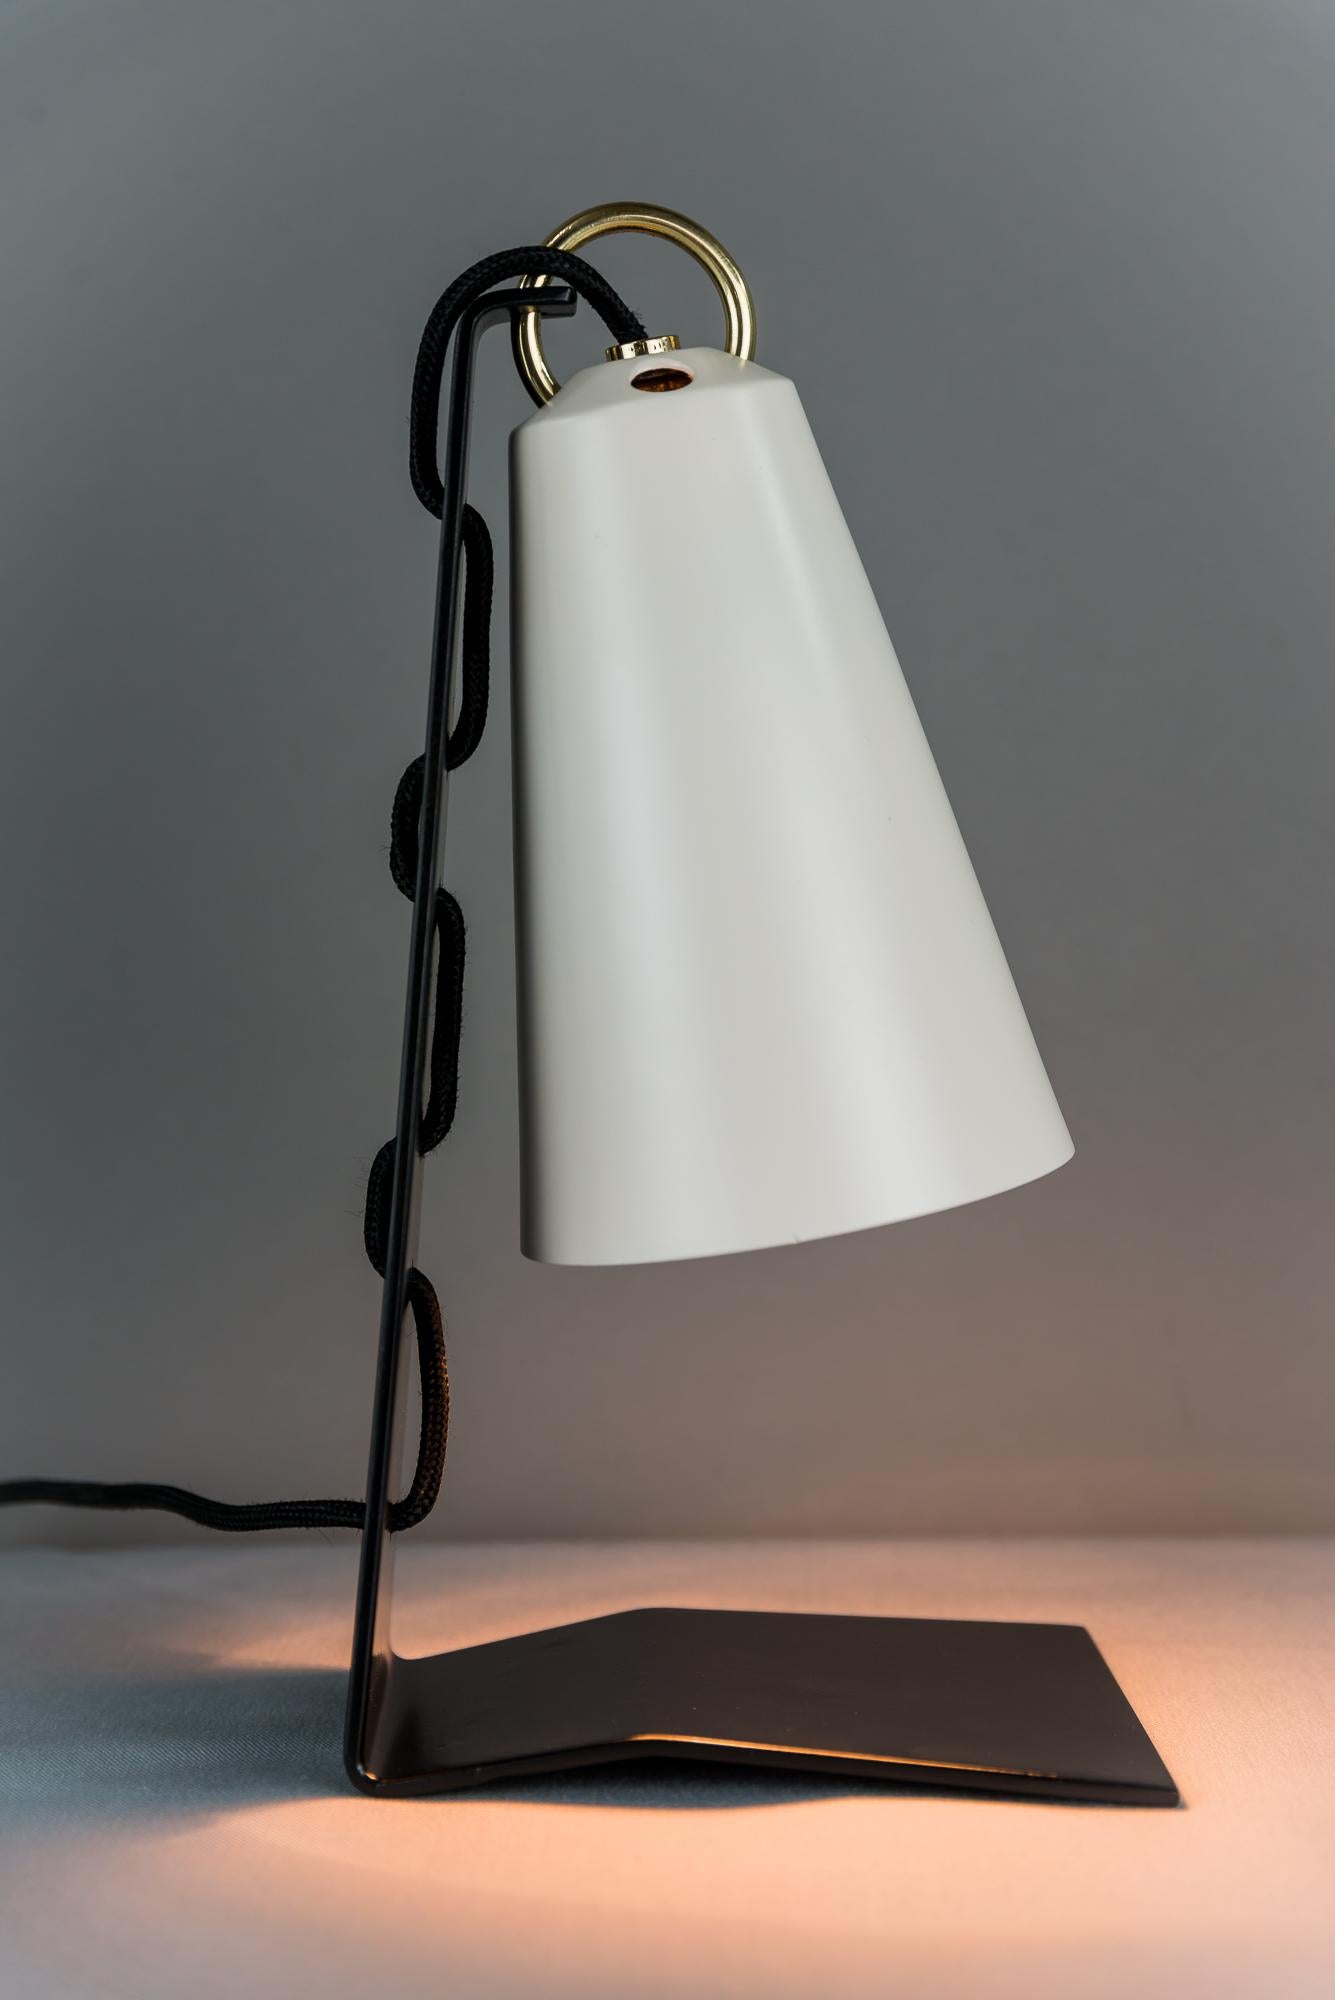 Black and White Austrian Modernist Metall Table Lamp Hook by J. T. Kalmar 1960s For Sale 3